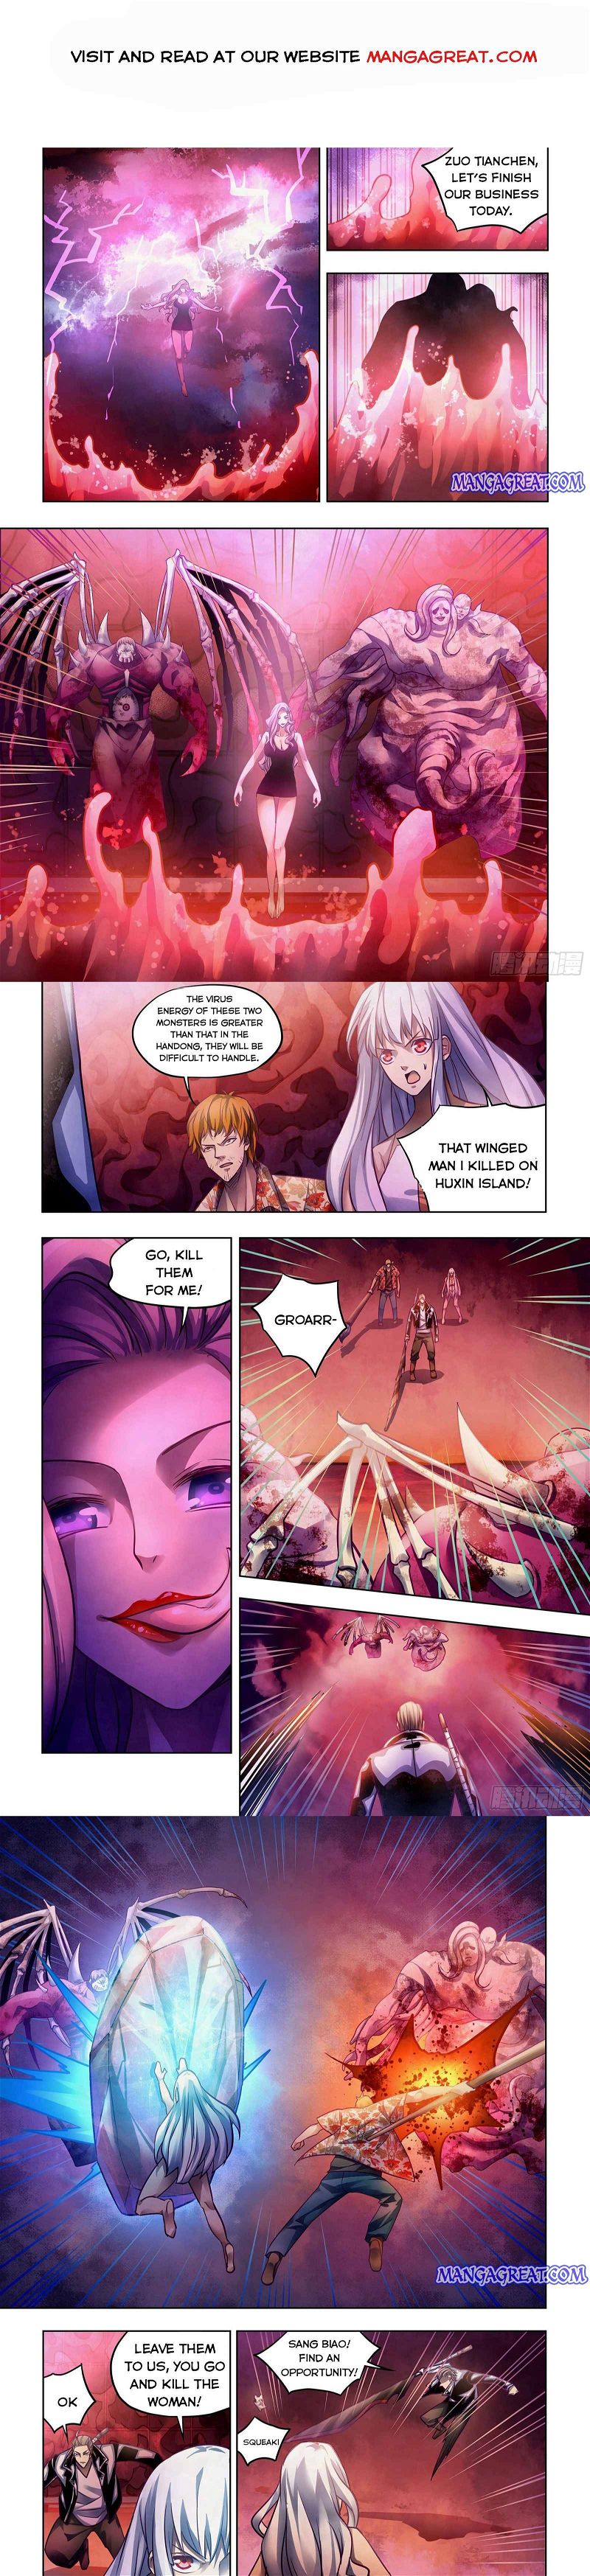 The Last Human Chapter 367 page 1